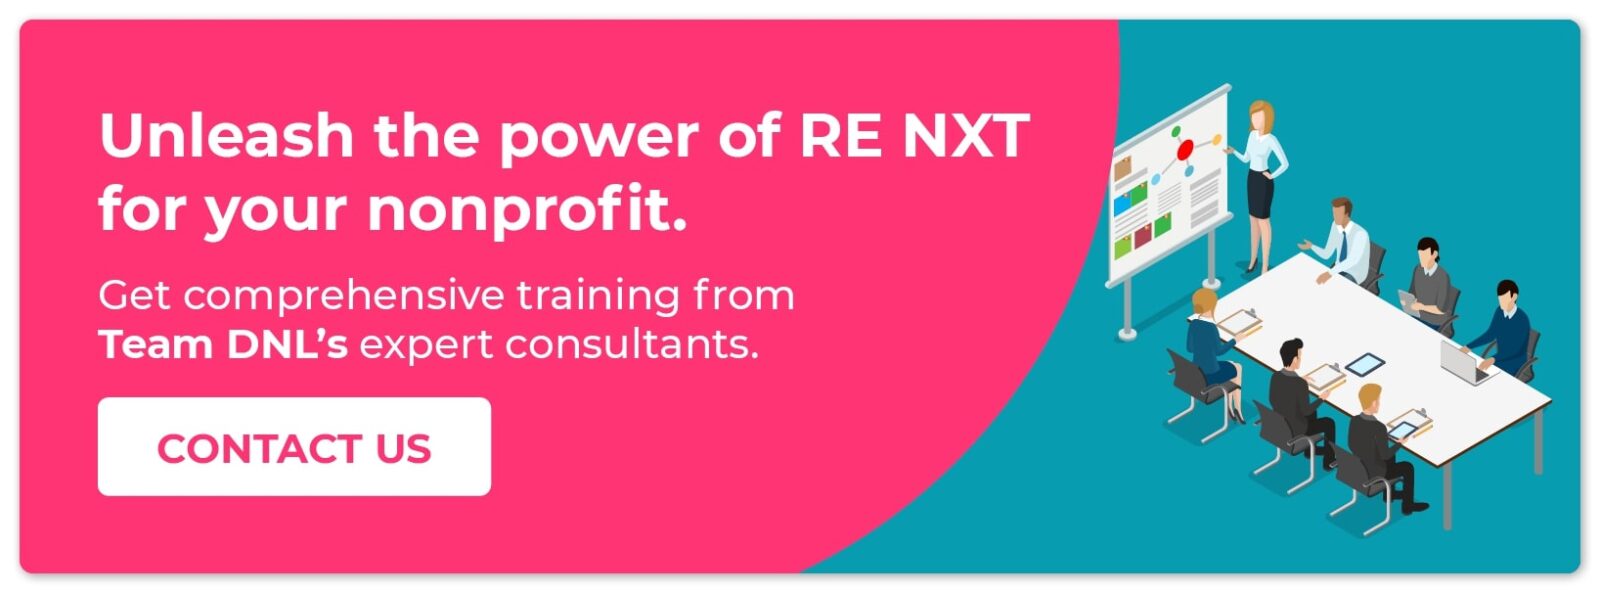 Learn more about DNL OmniMedia's Raiser's Edge NXT training services!